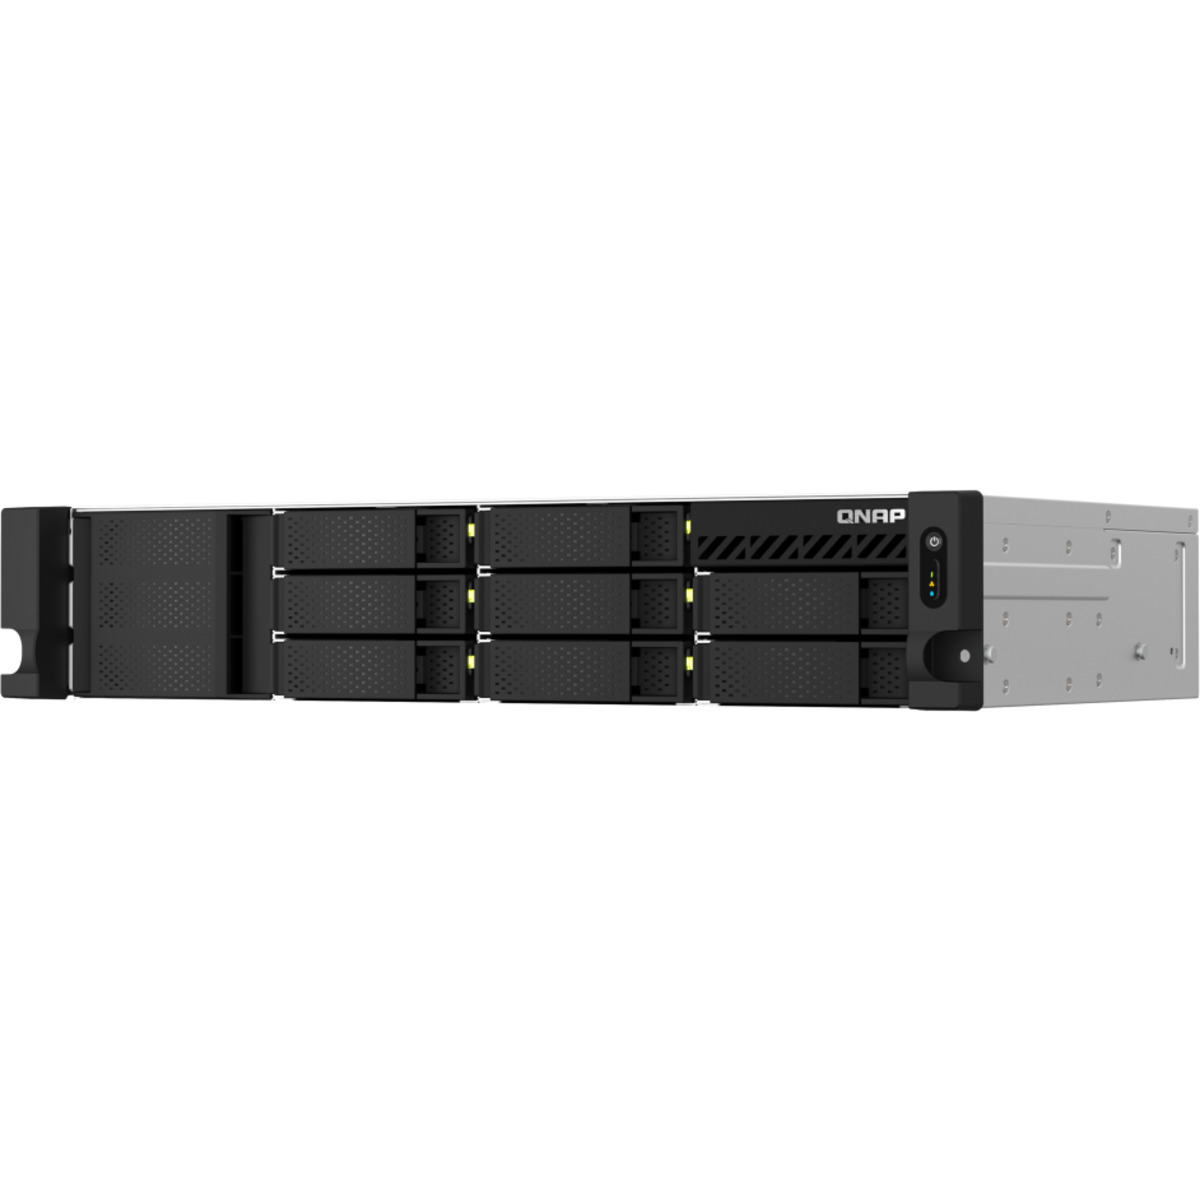 buy QNAP TS-864eU-RP 16tb RackMount NAS - Network Attached Storage Device 8x2000gb Seagate IronWolf Pro ST2000NT001 3.5 7200rpm SATA 6Gb/s HDD NAS Class Drives Installed - Burn-In Tested - nas headquarters buy network attached storage server device das new raid-5 free shipping simply usa TS-864eU-RP